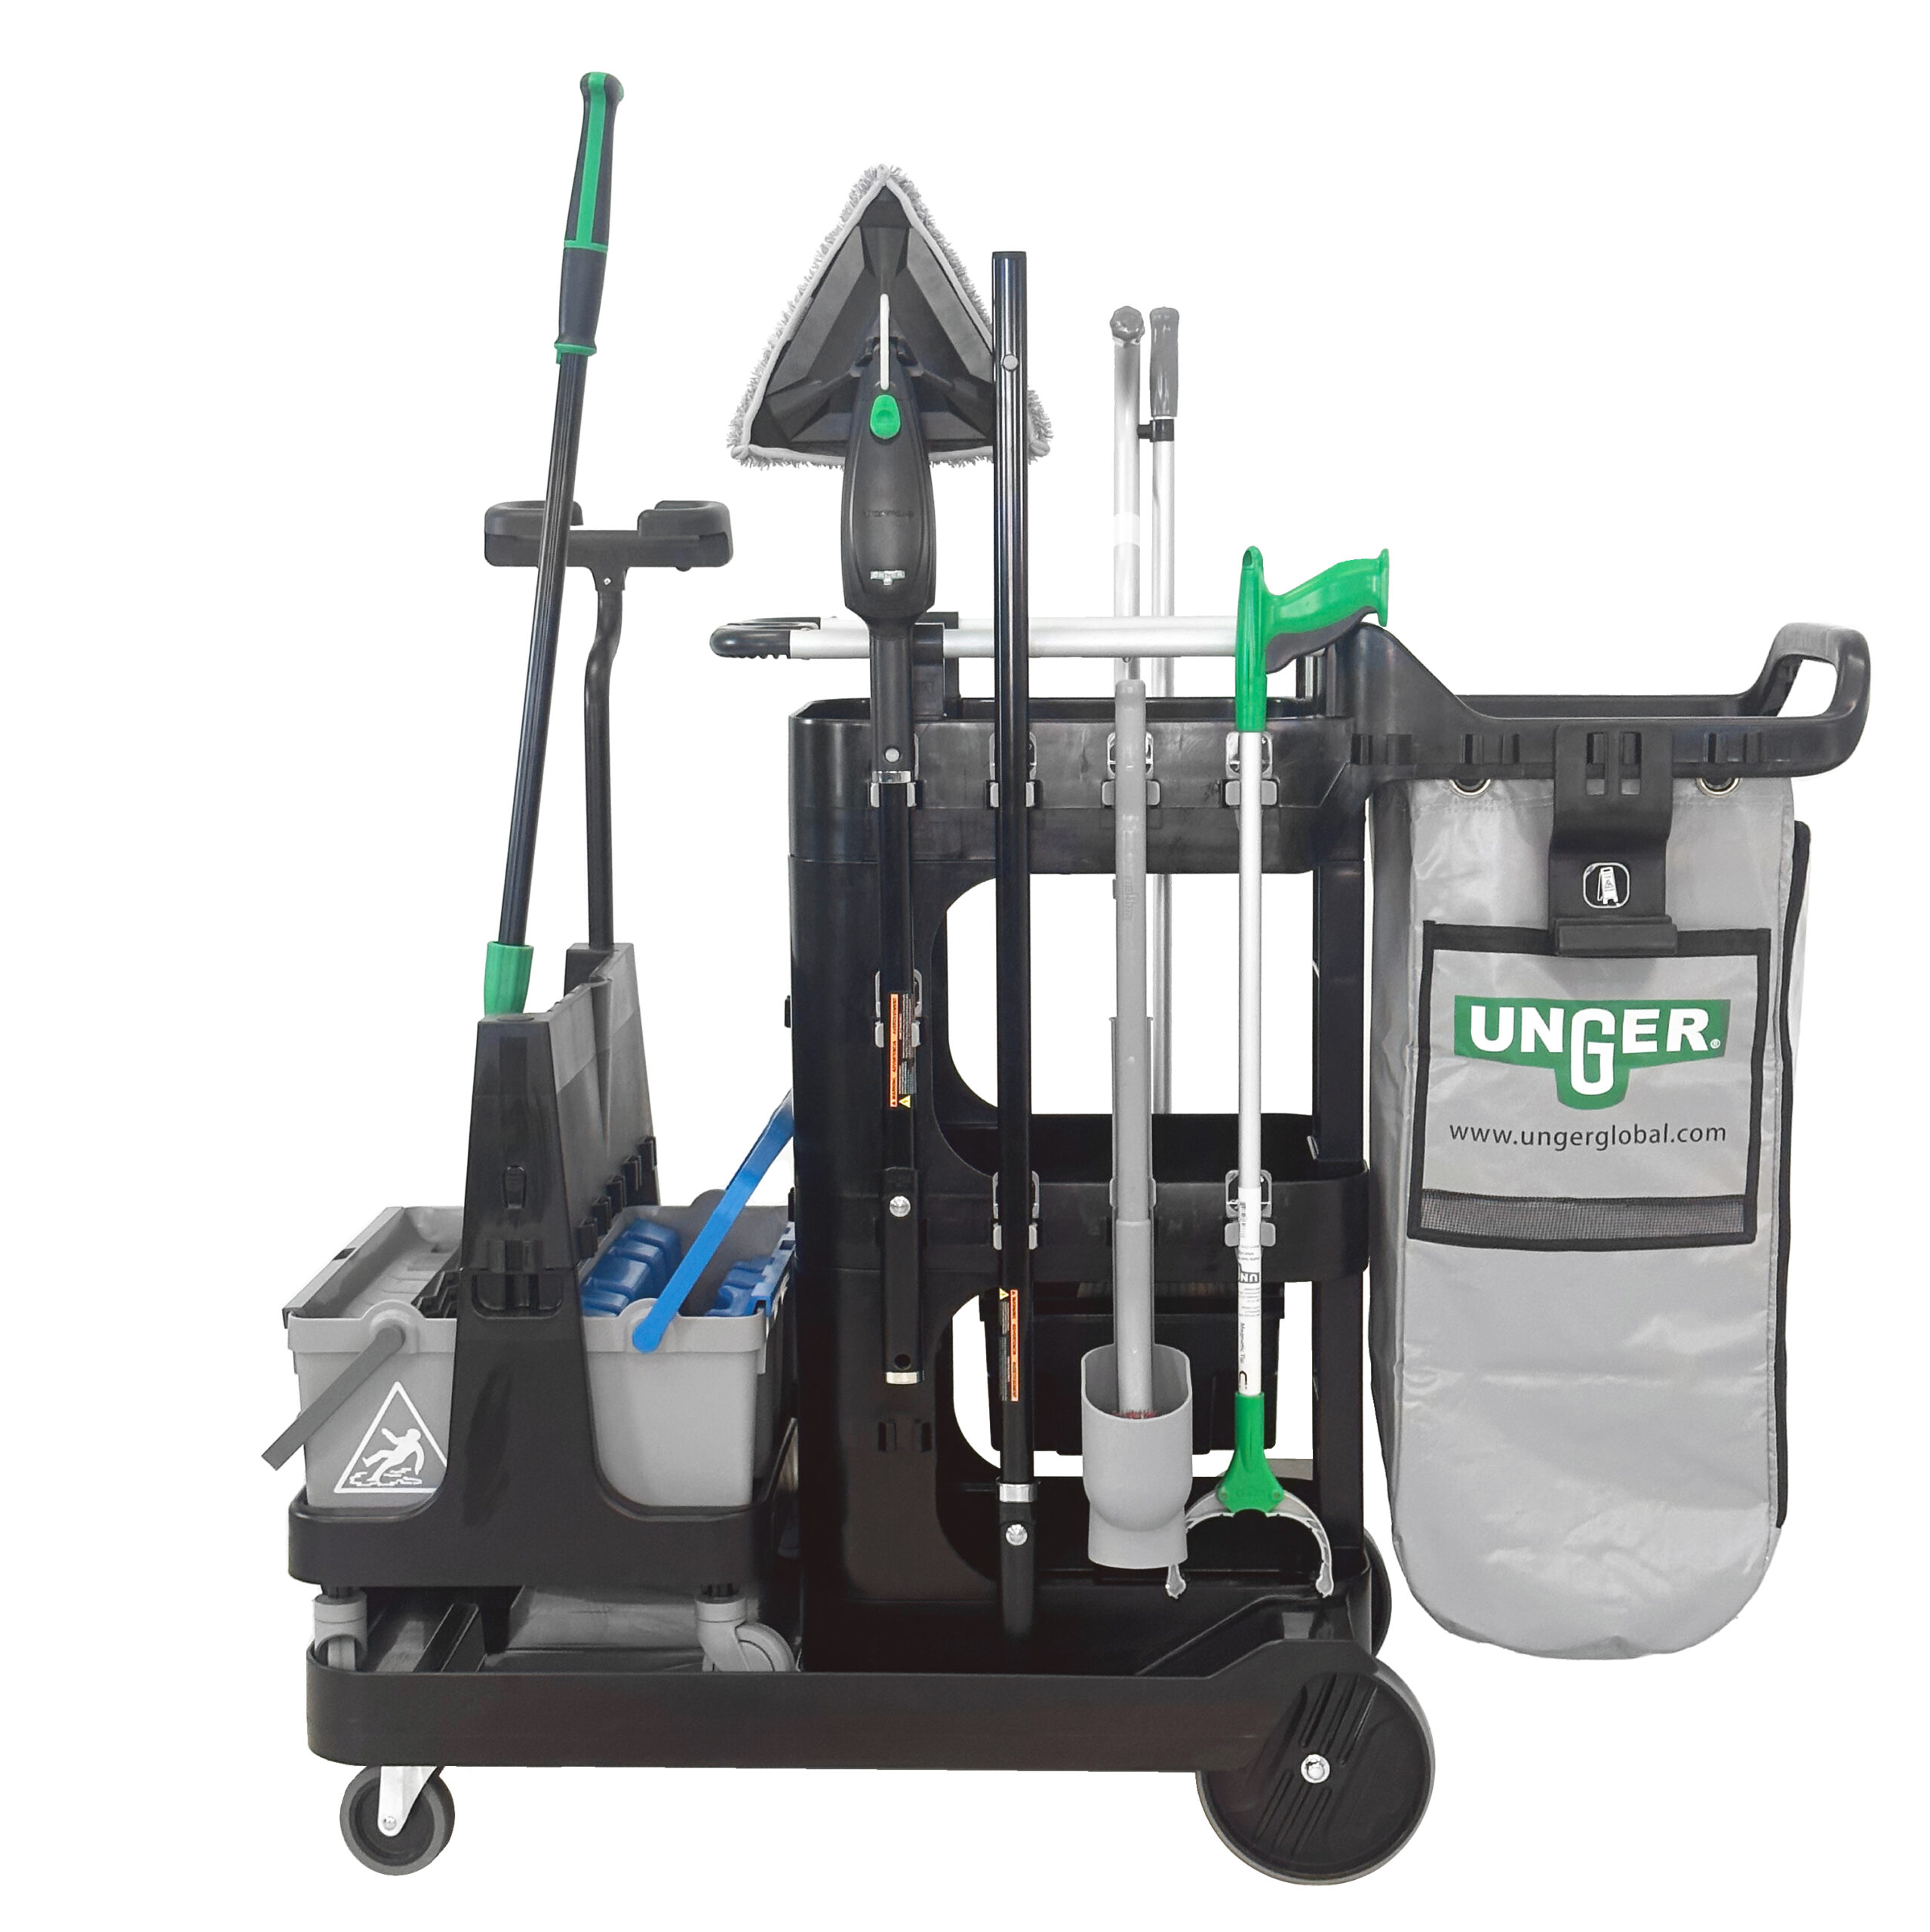 Unger DeepCleanRX Janitorial Cart System